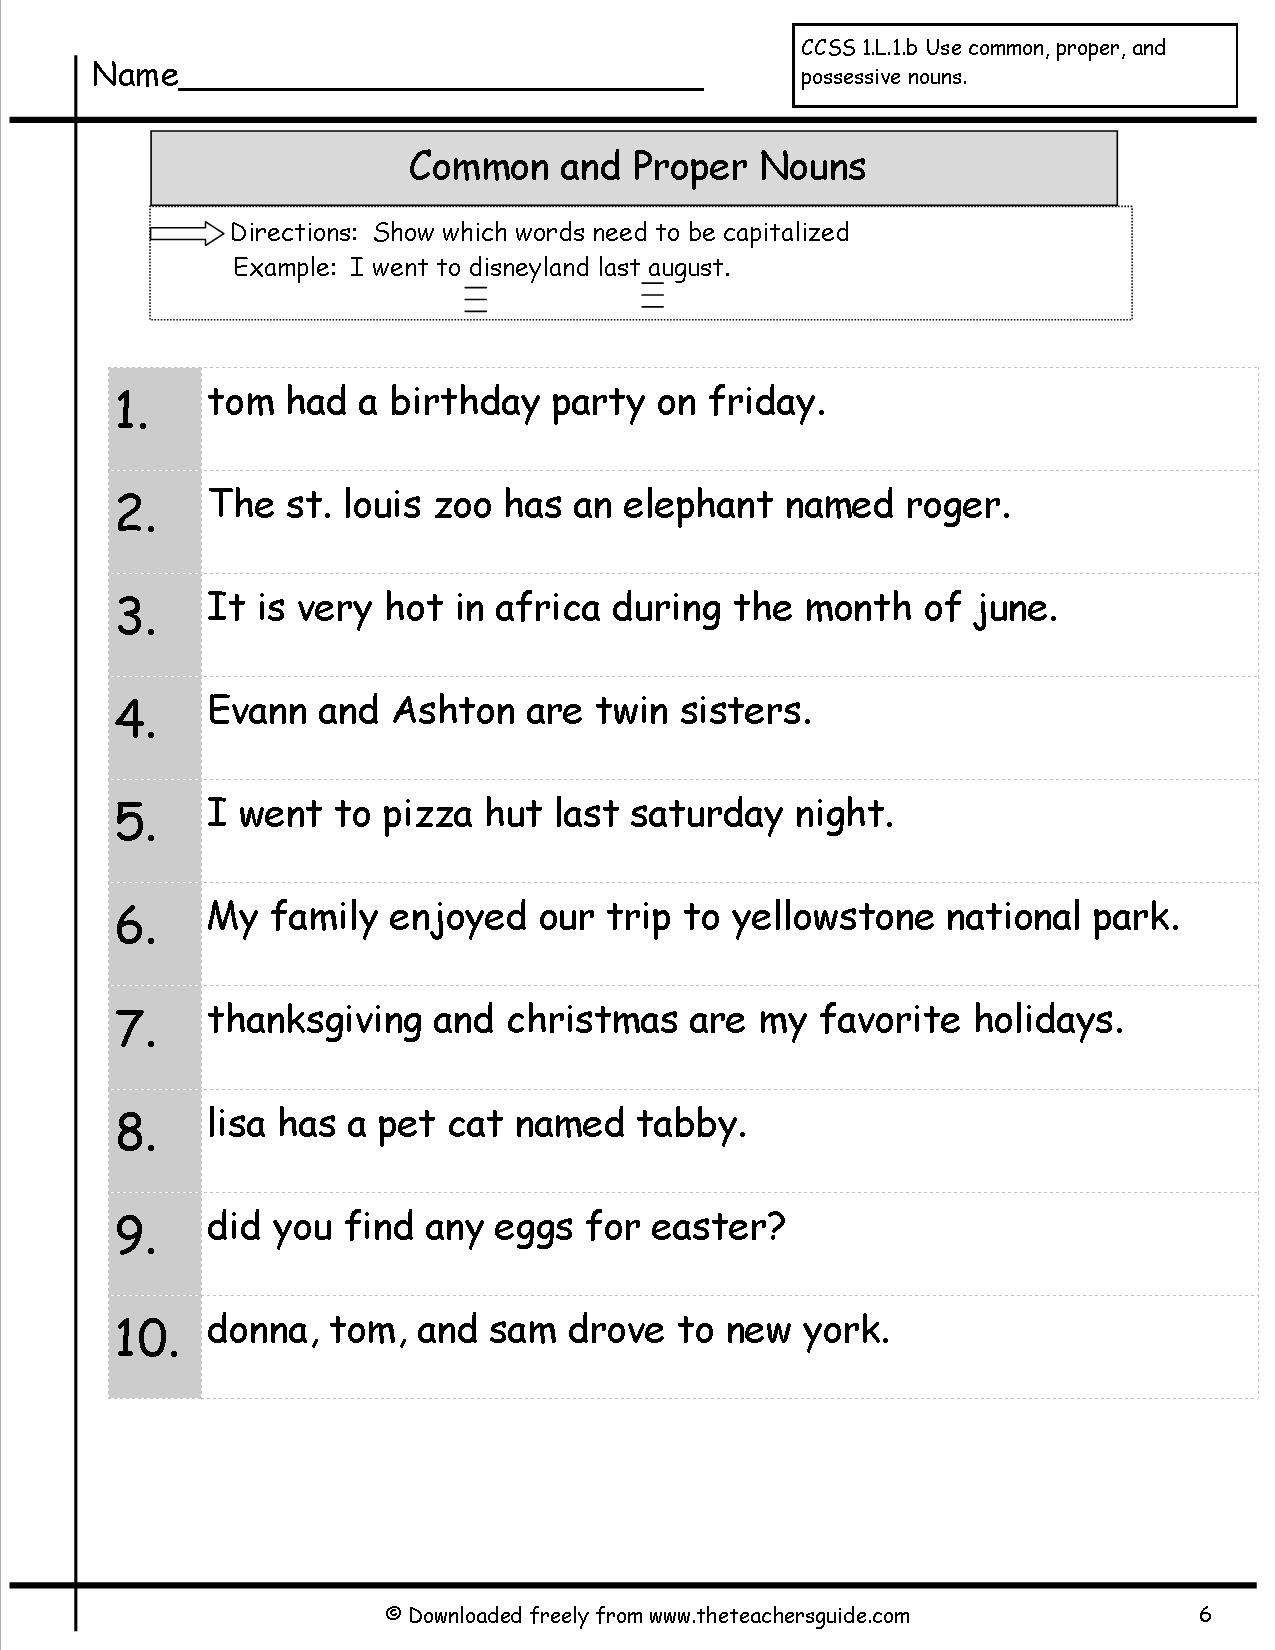 Worksheets On Common And Proper Nouns For Grade 3 Nouns Worksheet